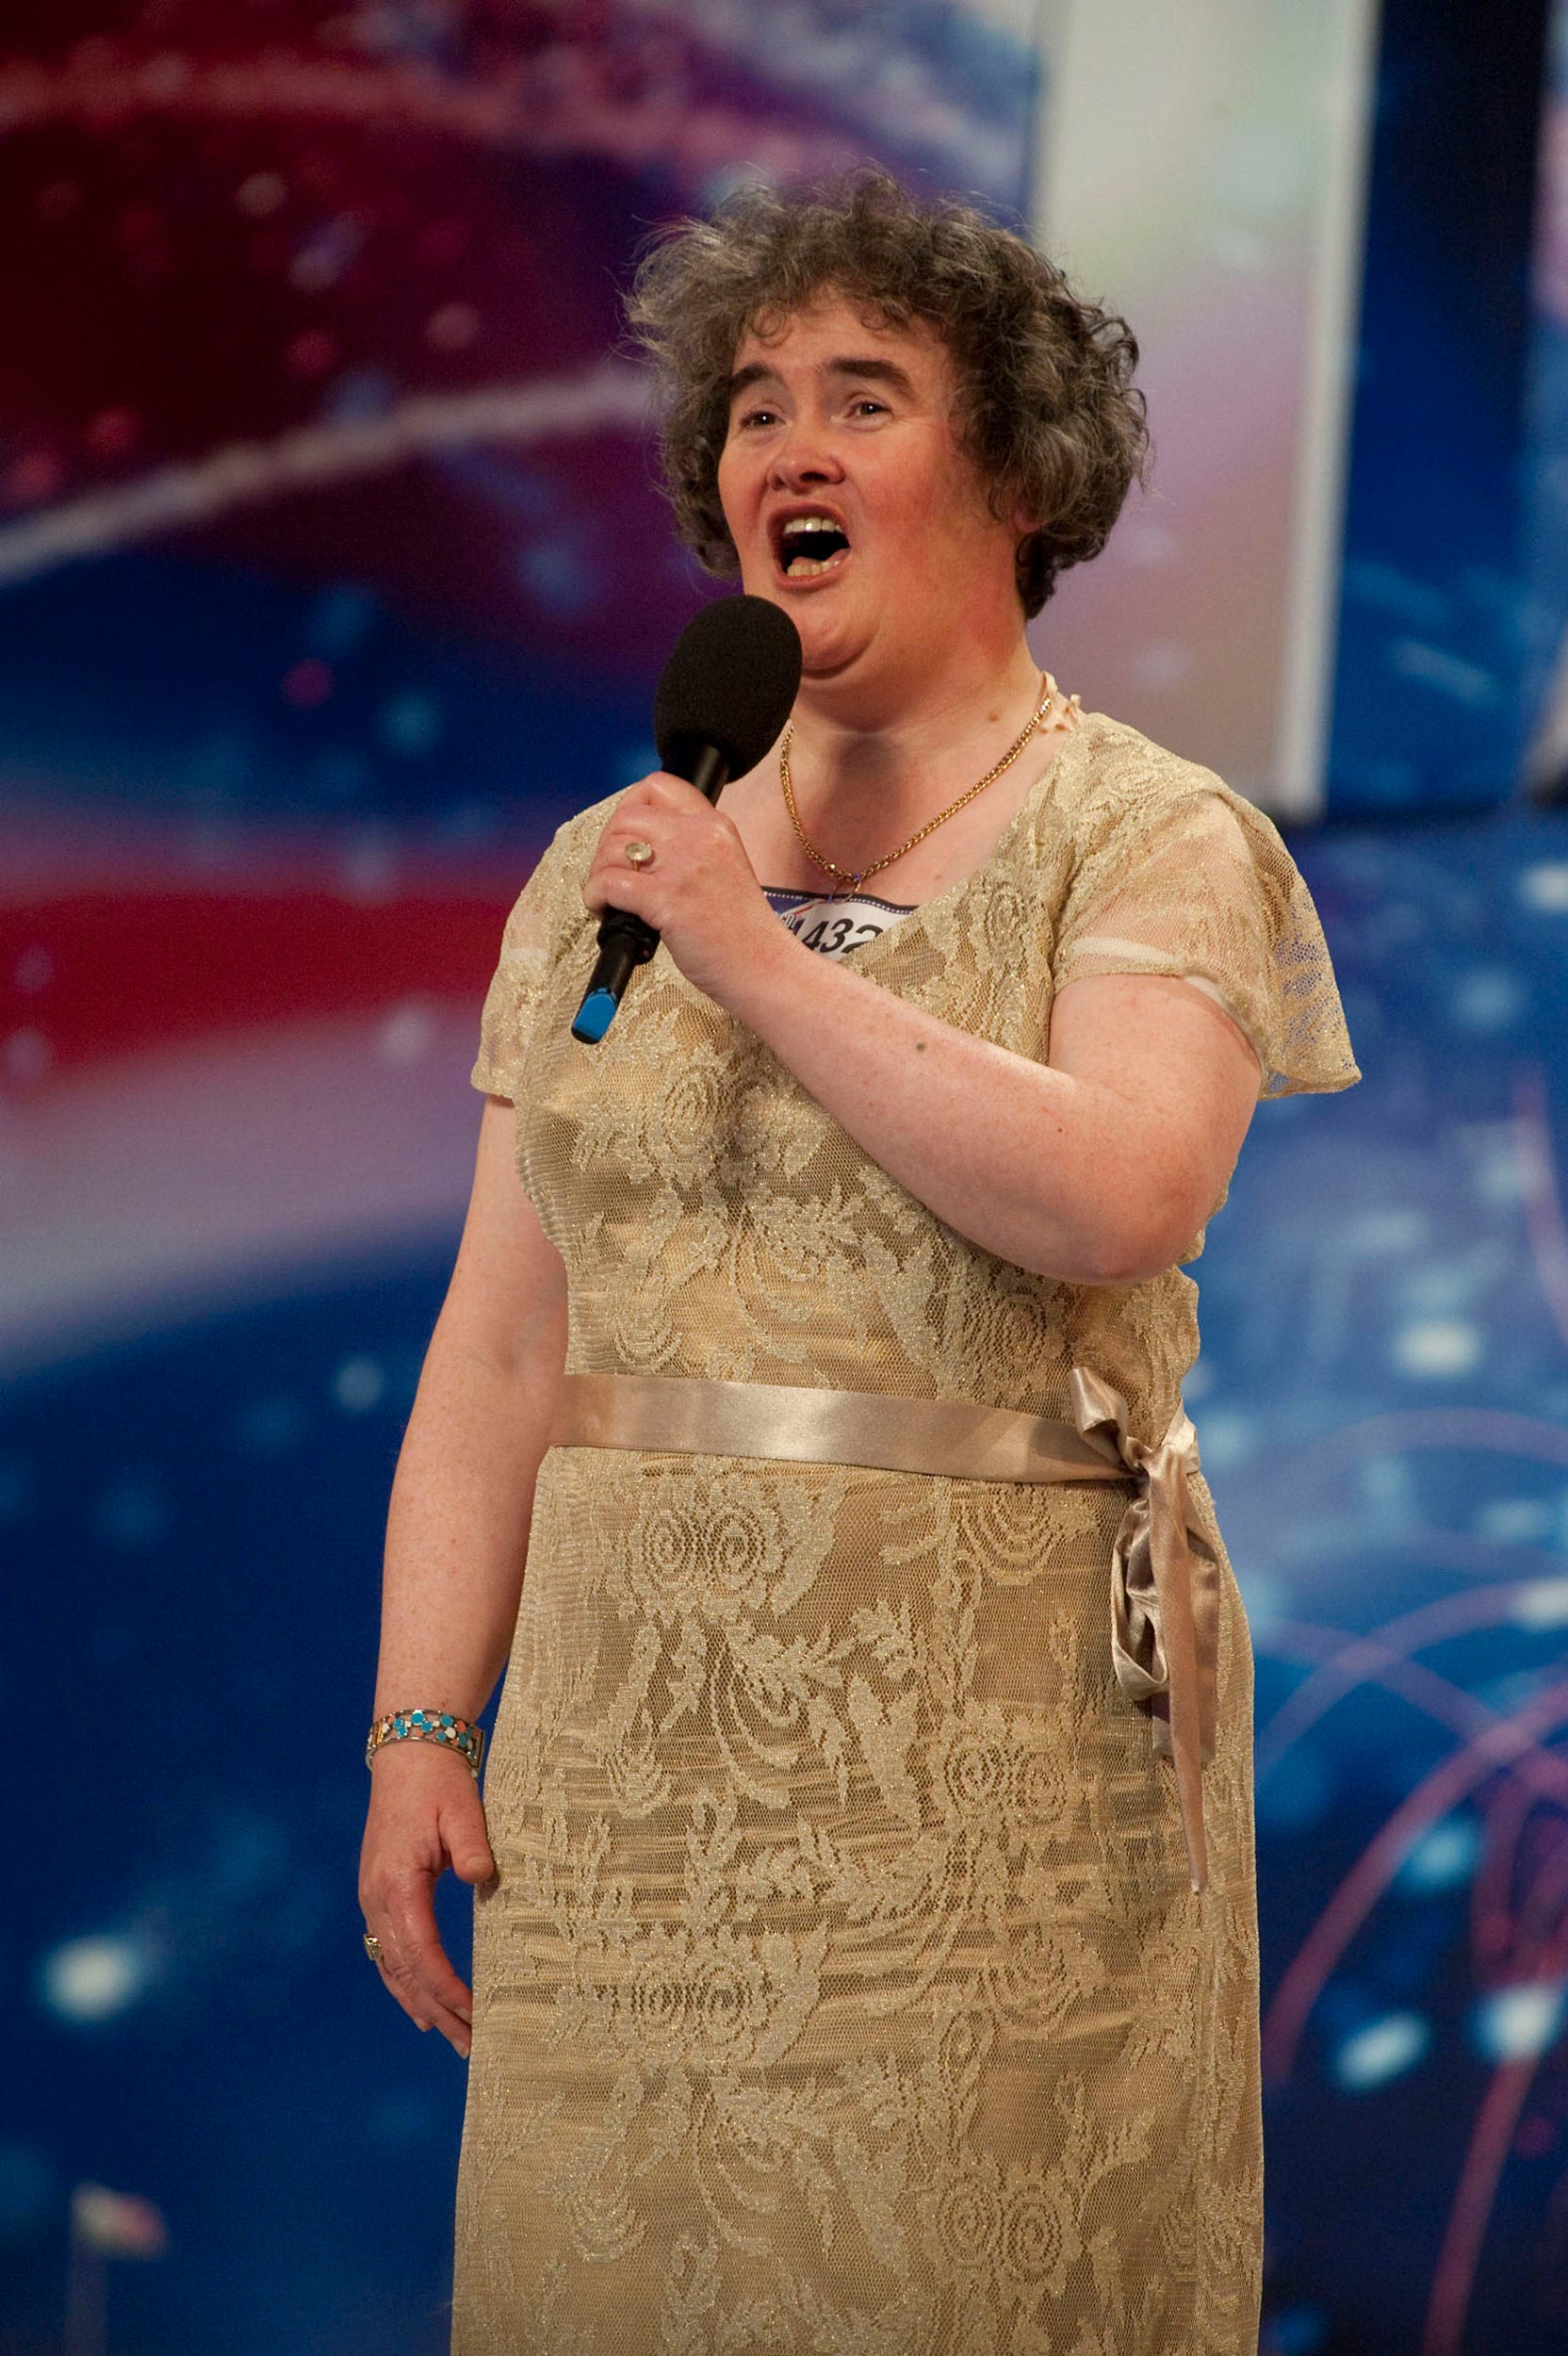 Odd Duck To Diva How Susan Boyle Became An Unlikely Star 10 Years Ago